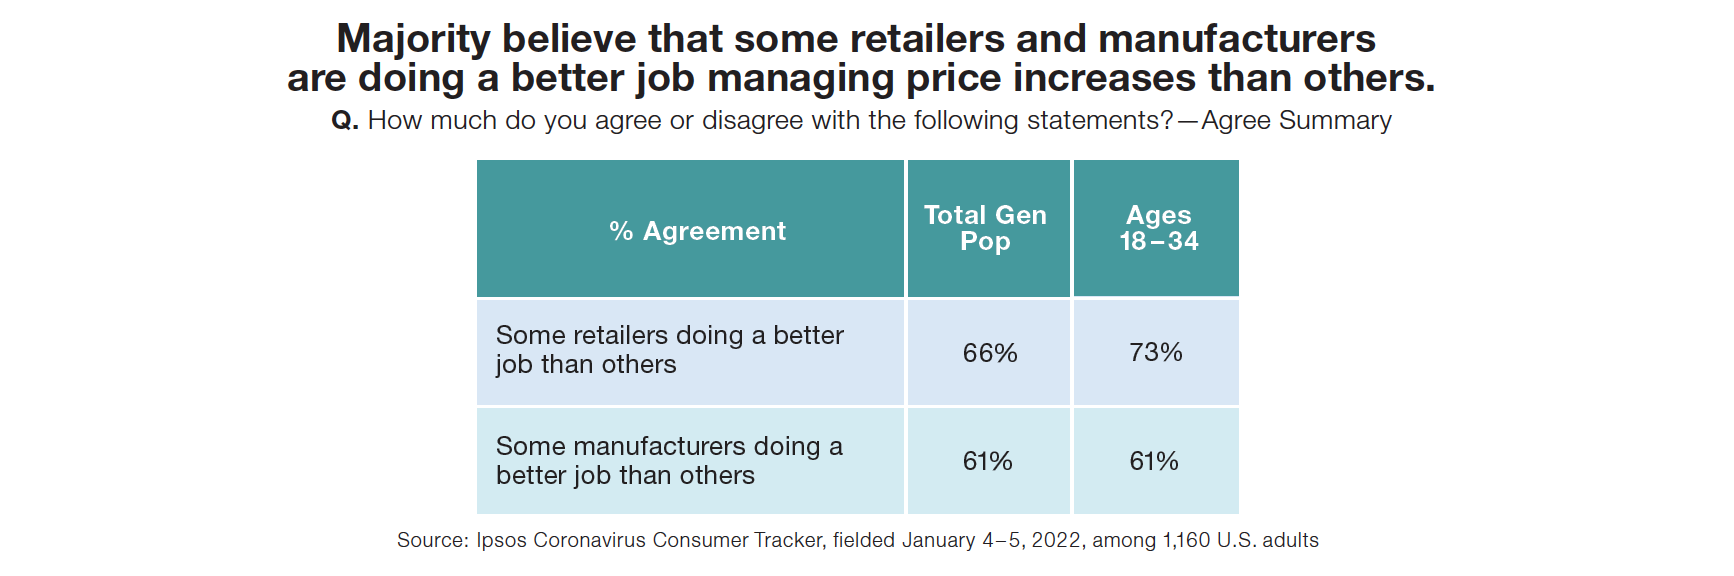 Majority believe that some retailers and manufacturers are doing a better job managing price increases than others.